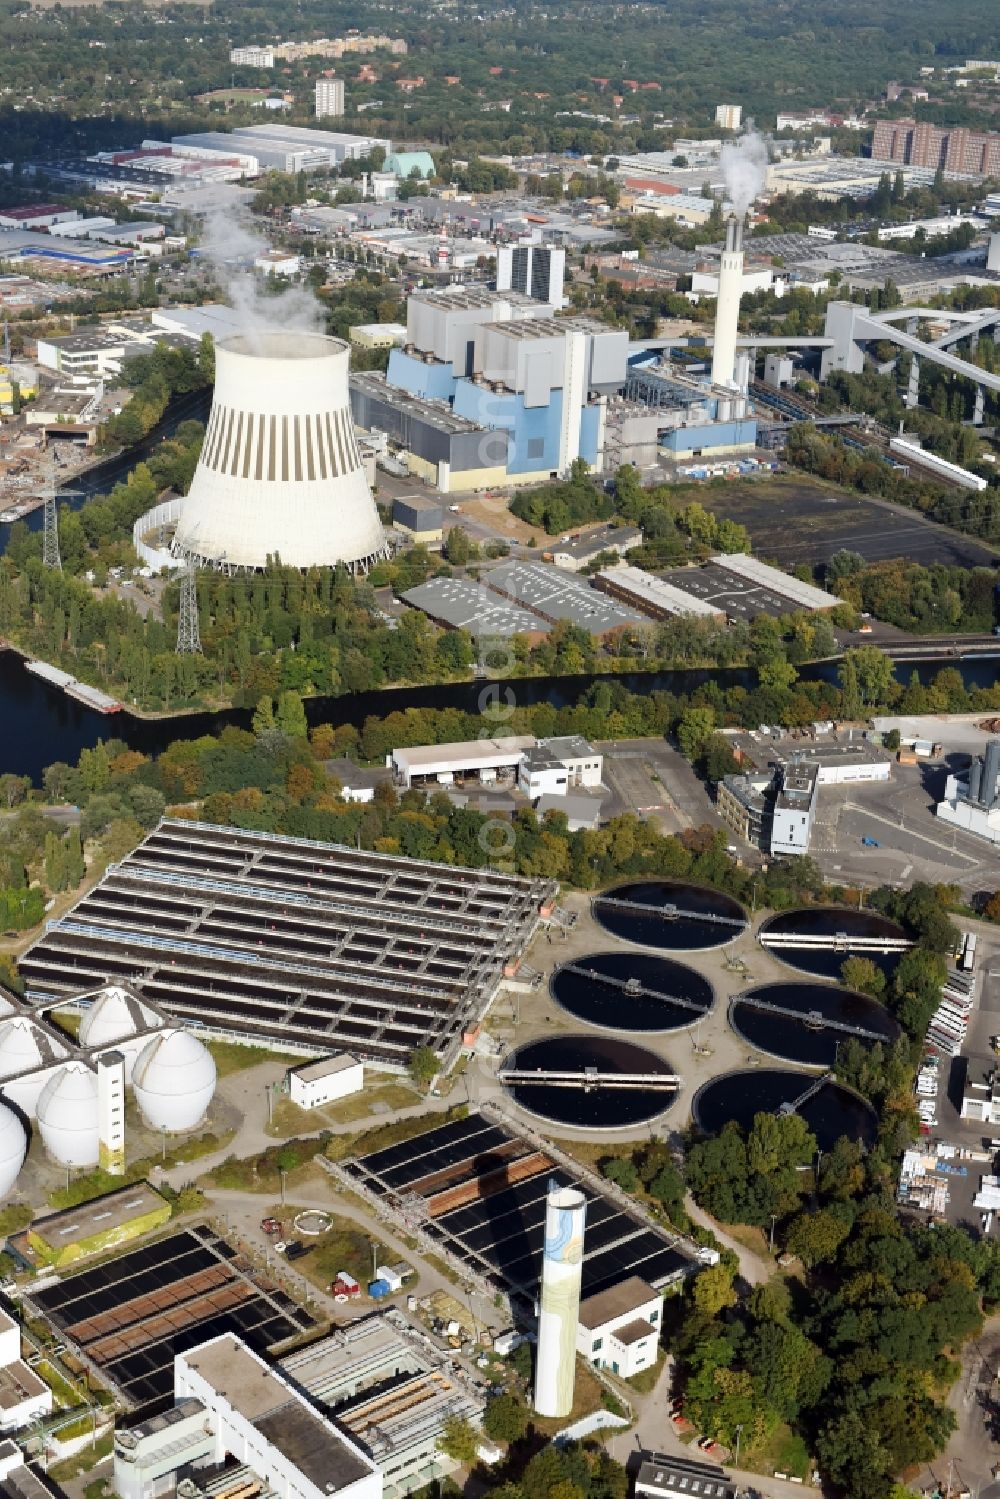 Aerial photograph Berlin - Sewage works Basin and purification steps for waste water treatment of Berliner Wasserbetriebe destrict Ruhleben in Berlin